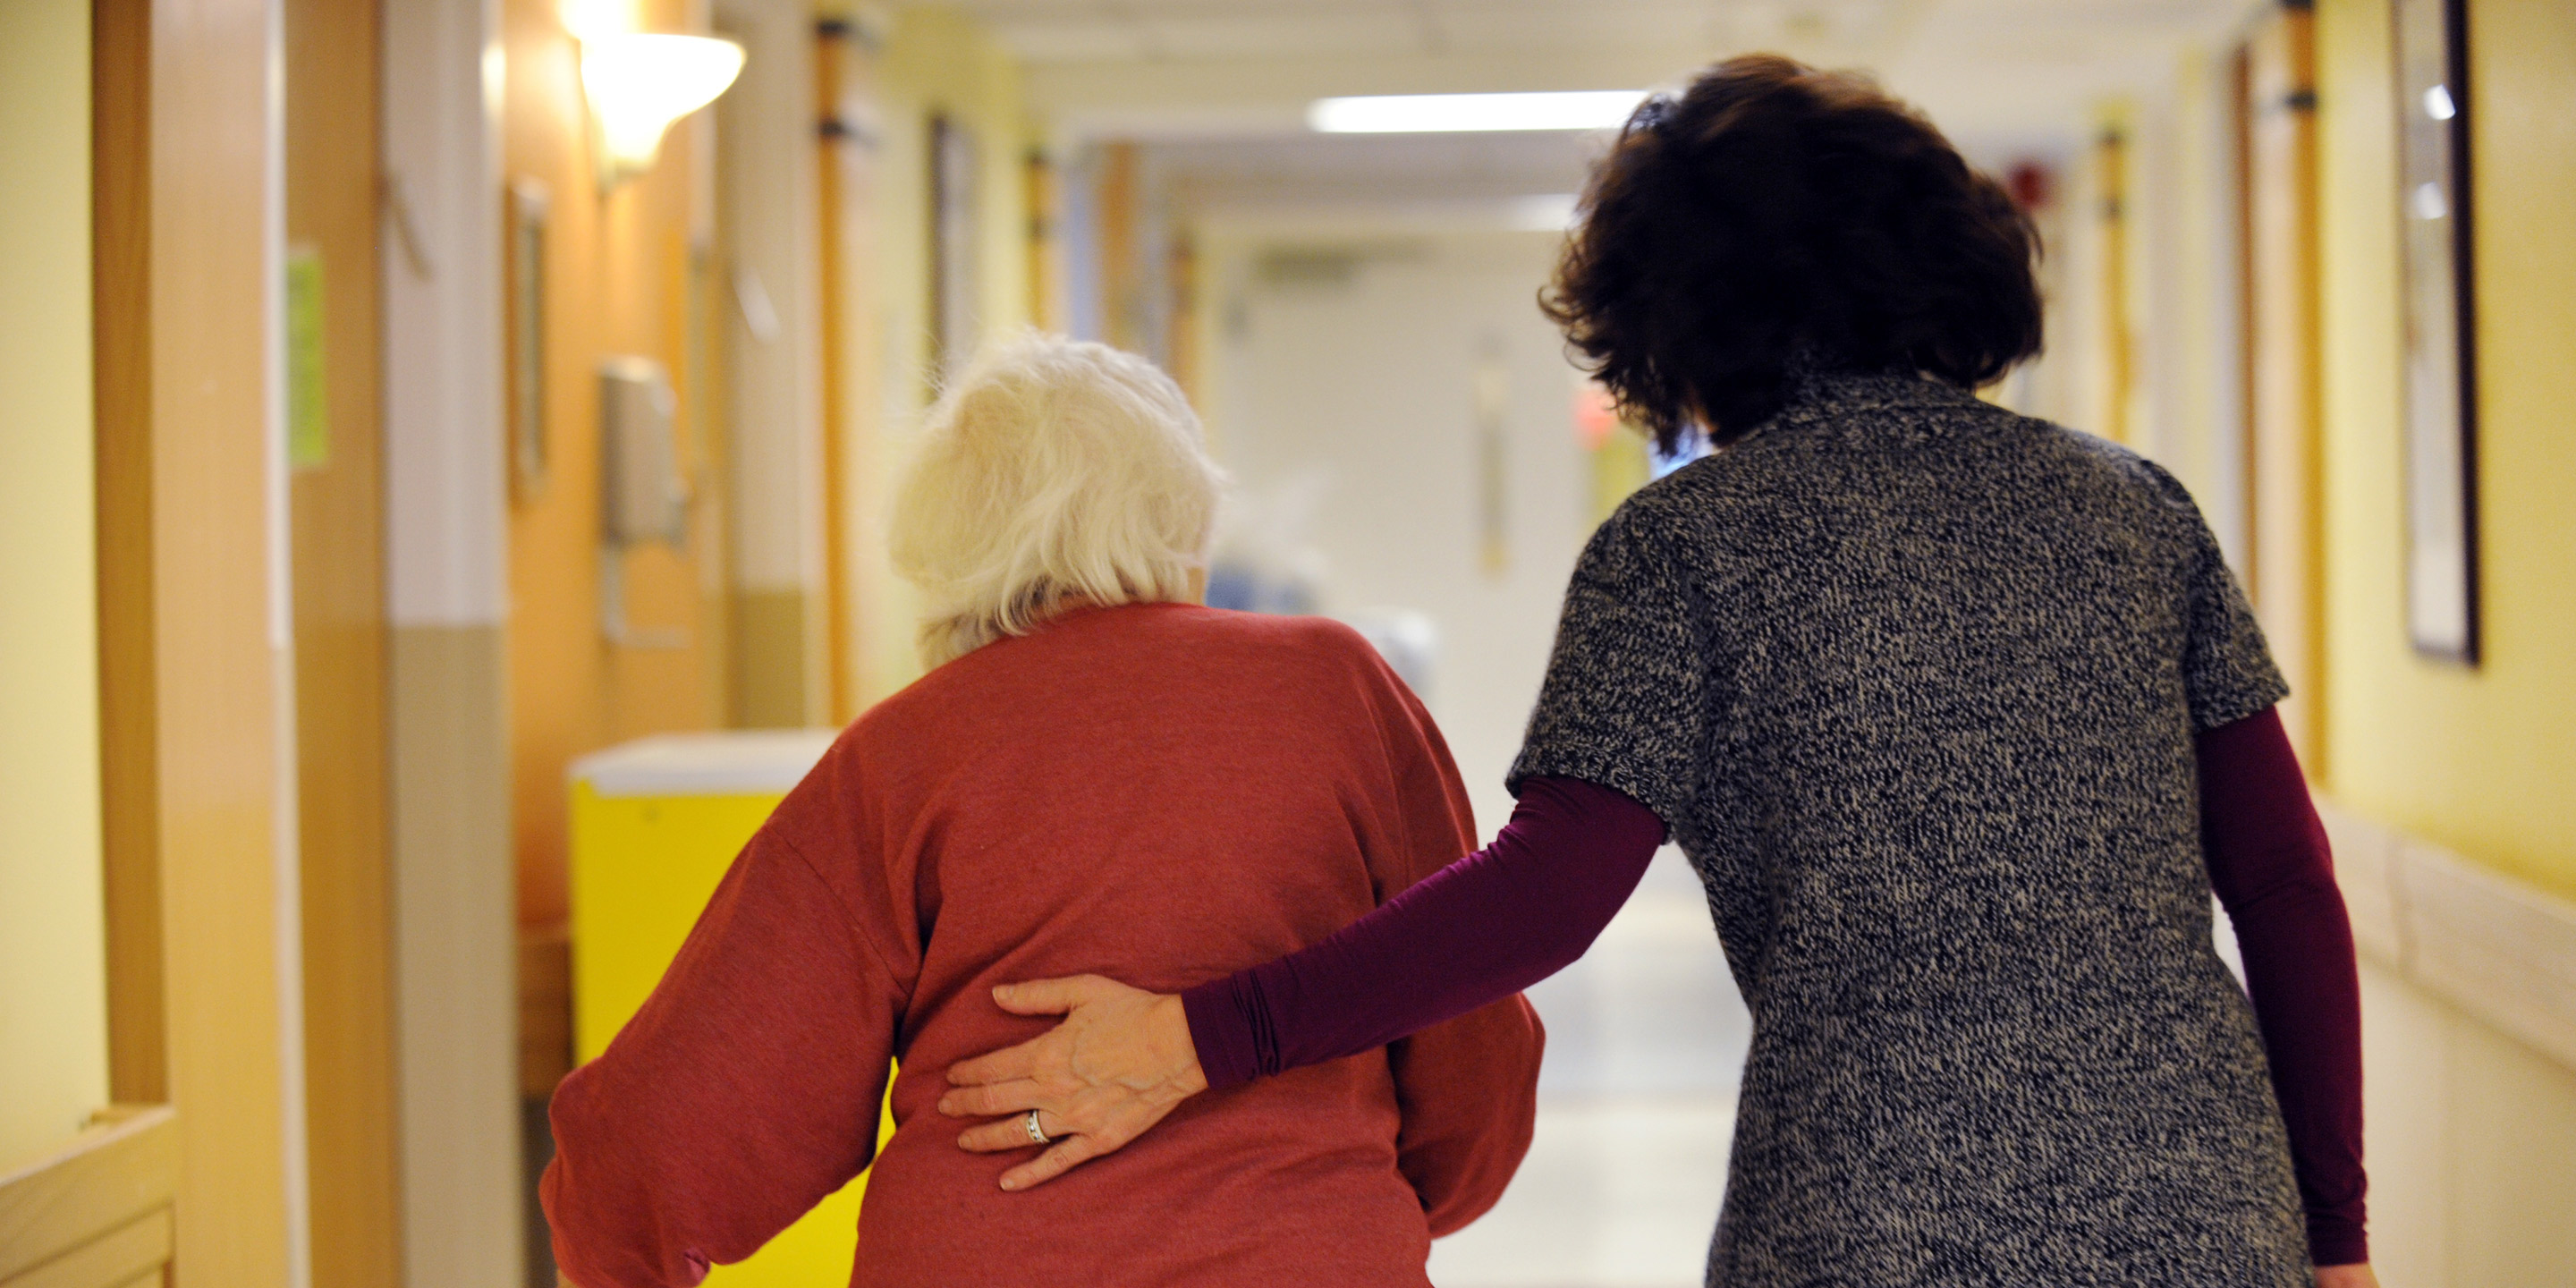 A woman with a walker walks down a hallway with another woman who helps guide her